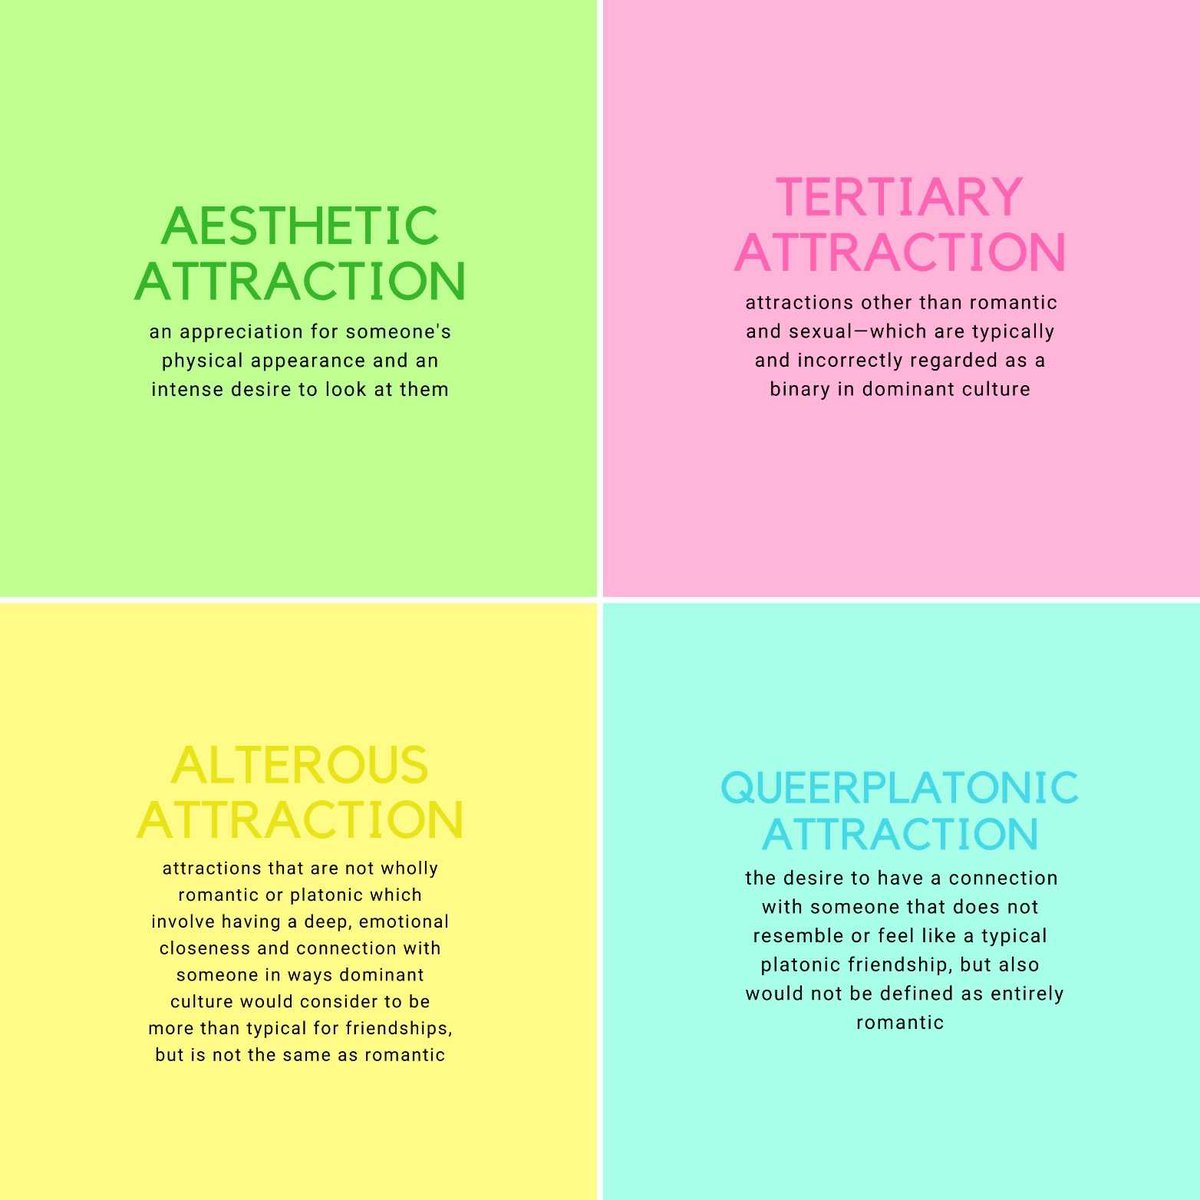 A simple guide to attraction and relevant terminology: